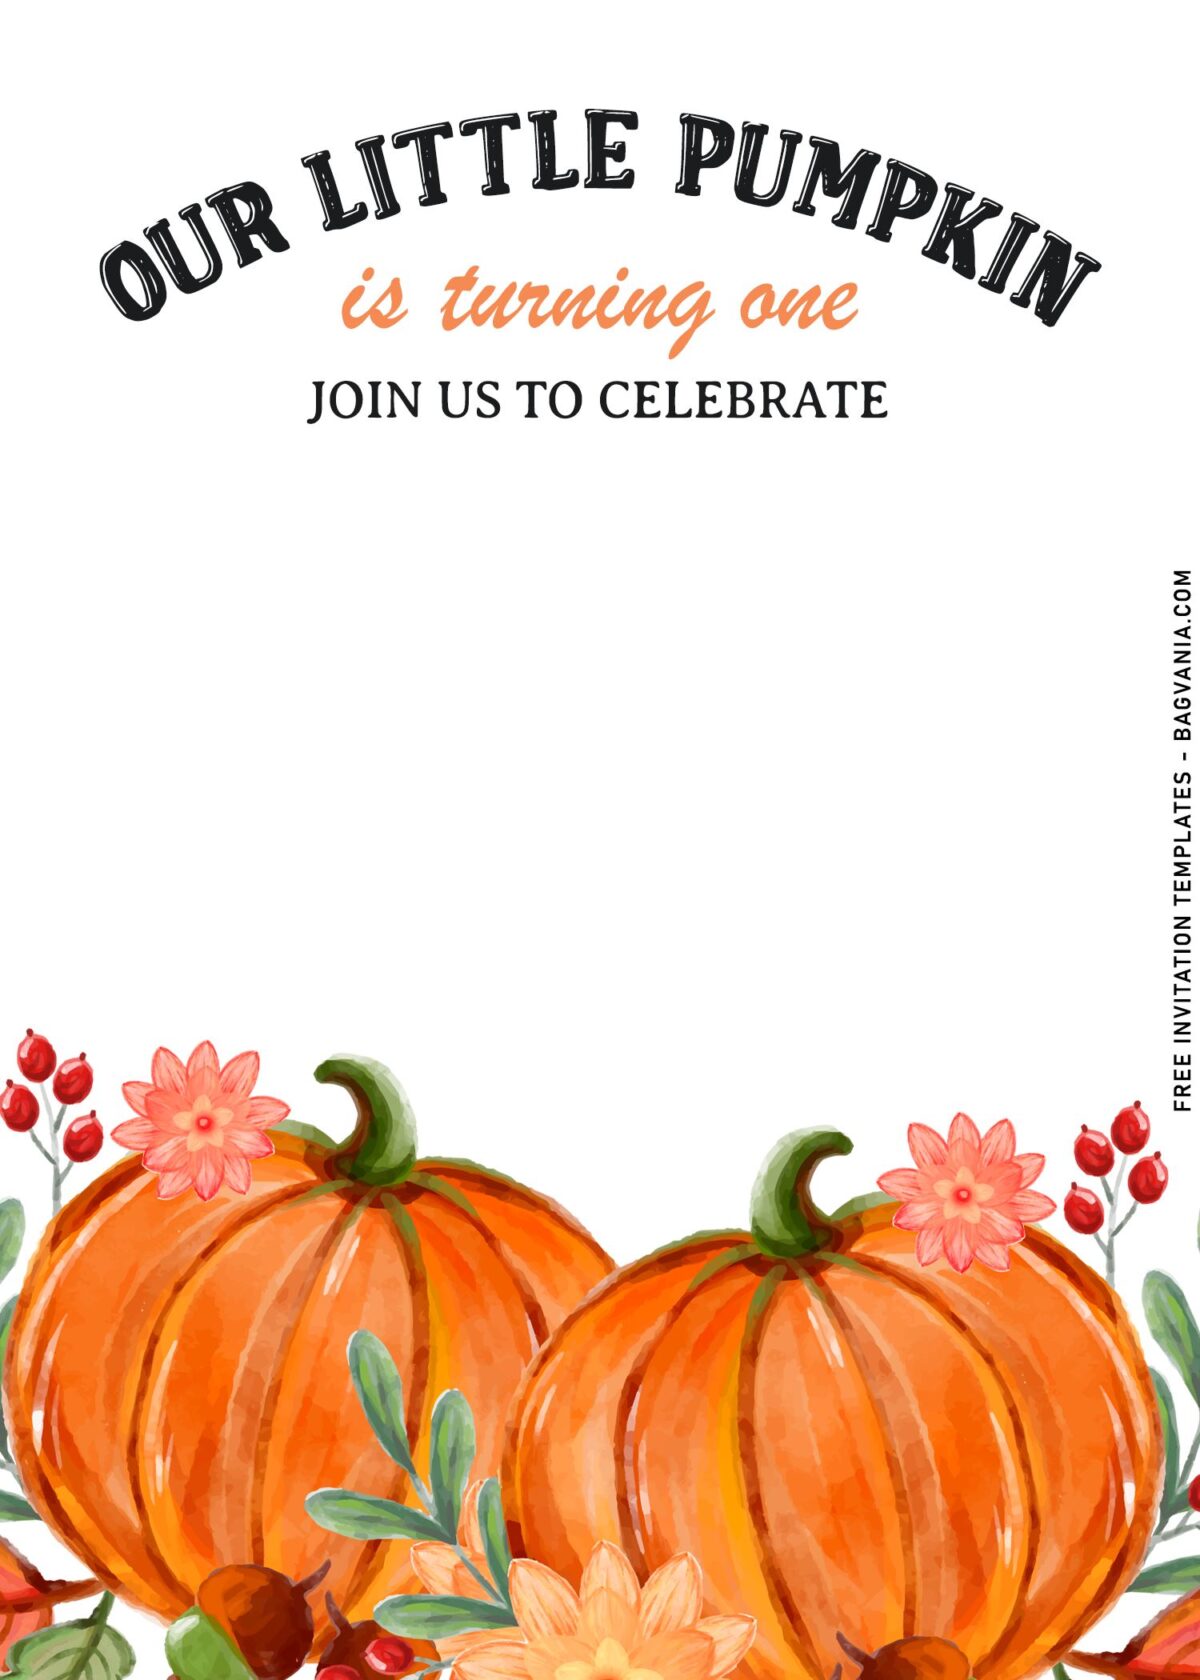 8+ Cute Pumpkin Patch First Birthday Party Invitation Templates with orange teal pumpkins